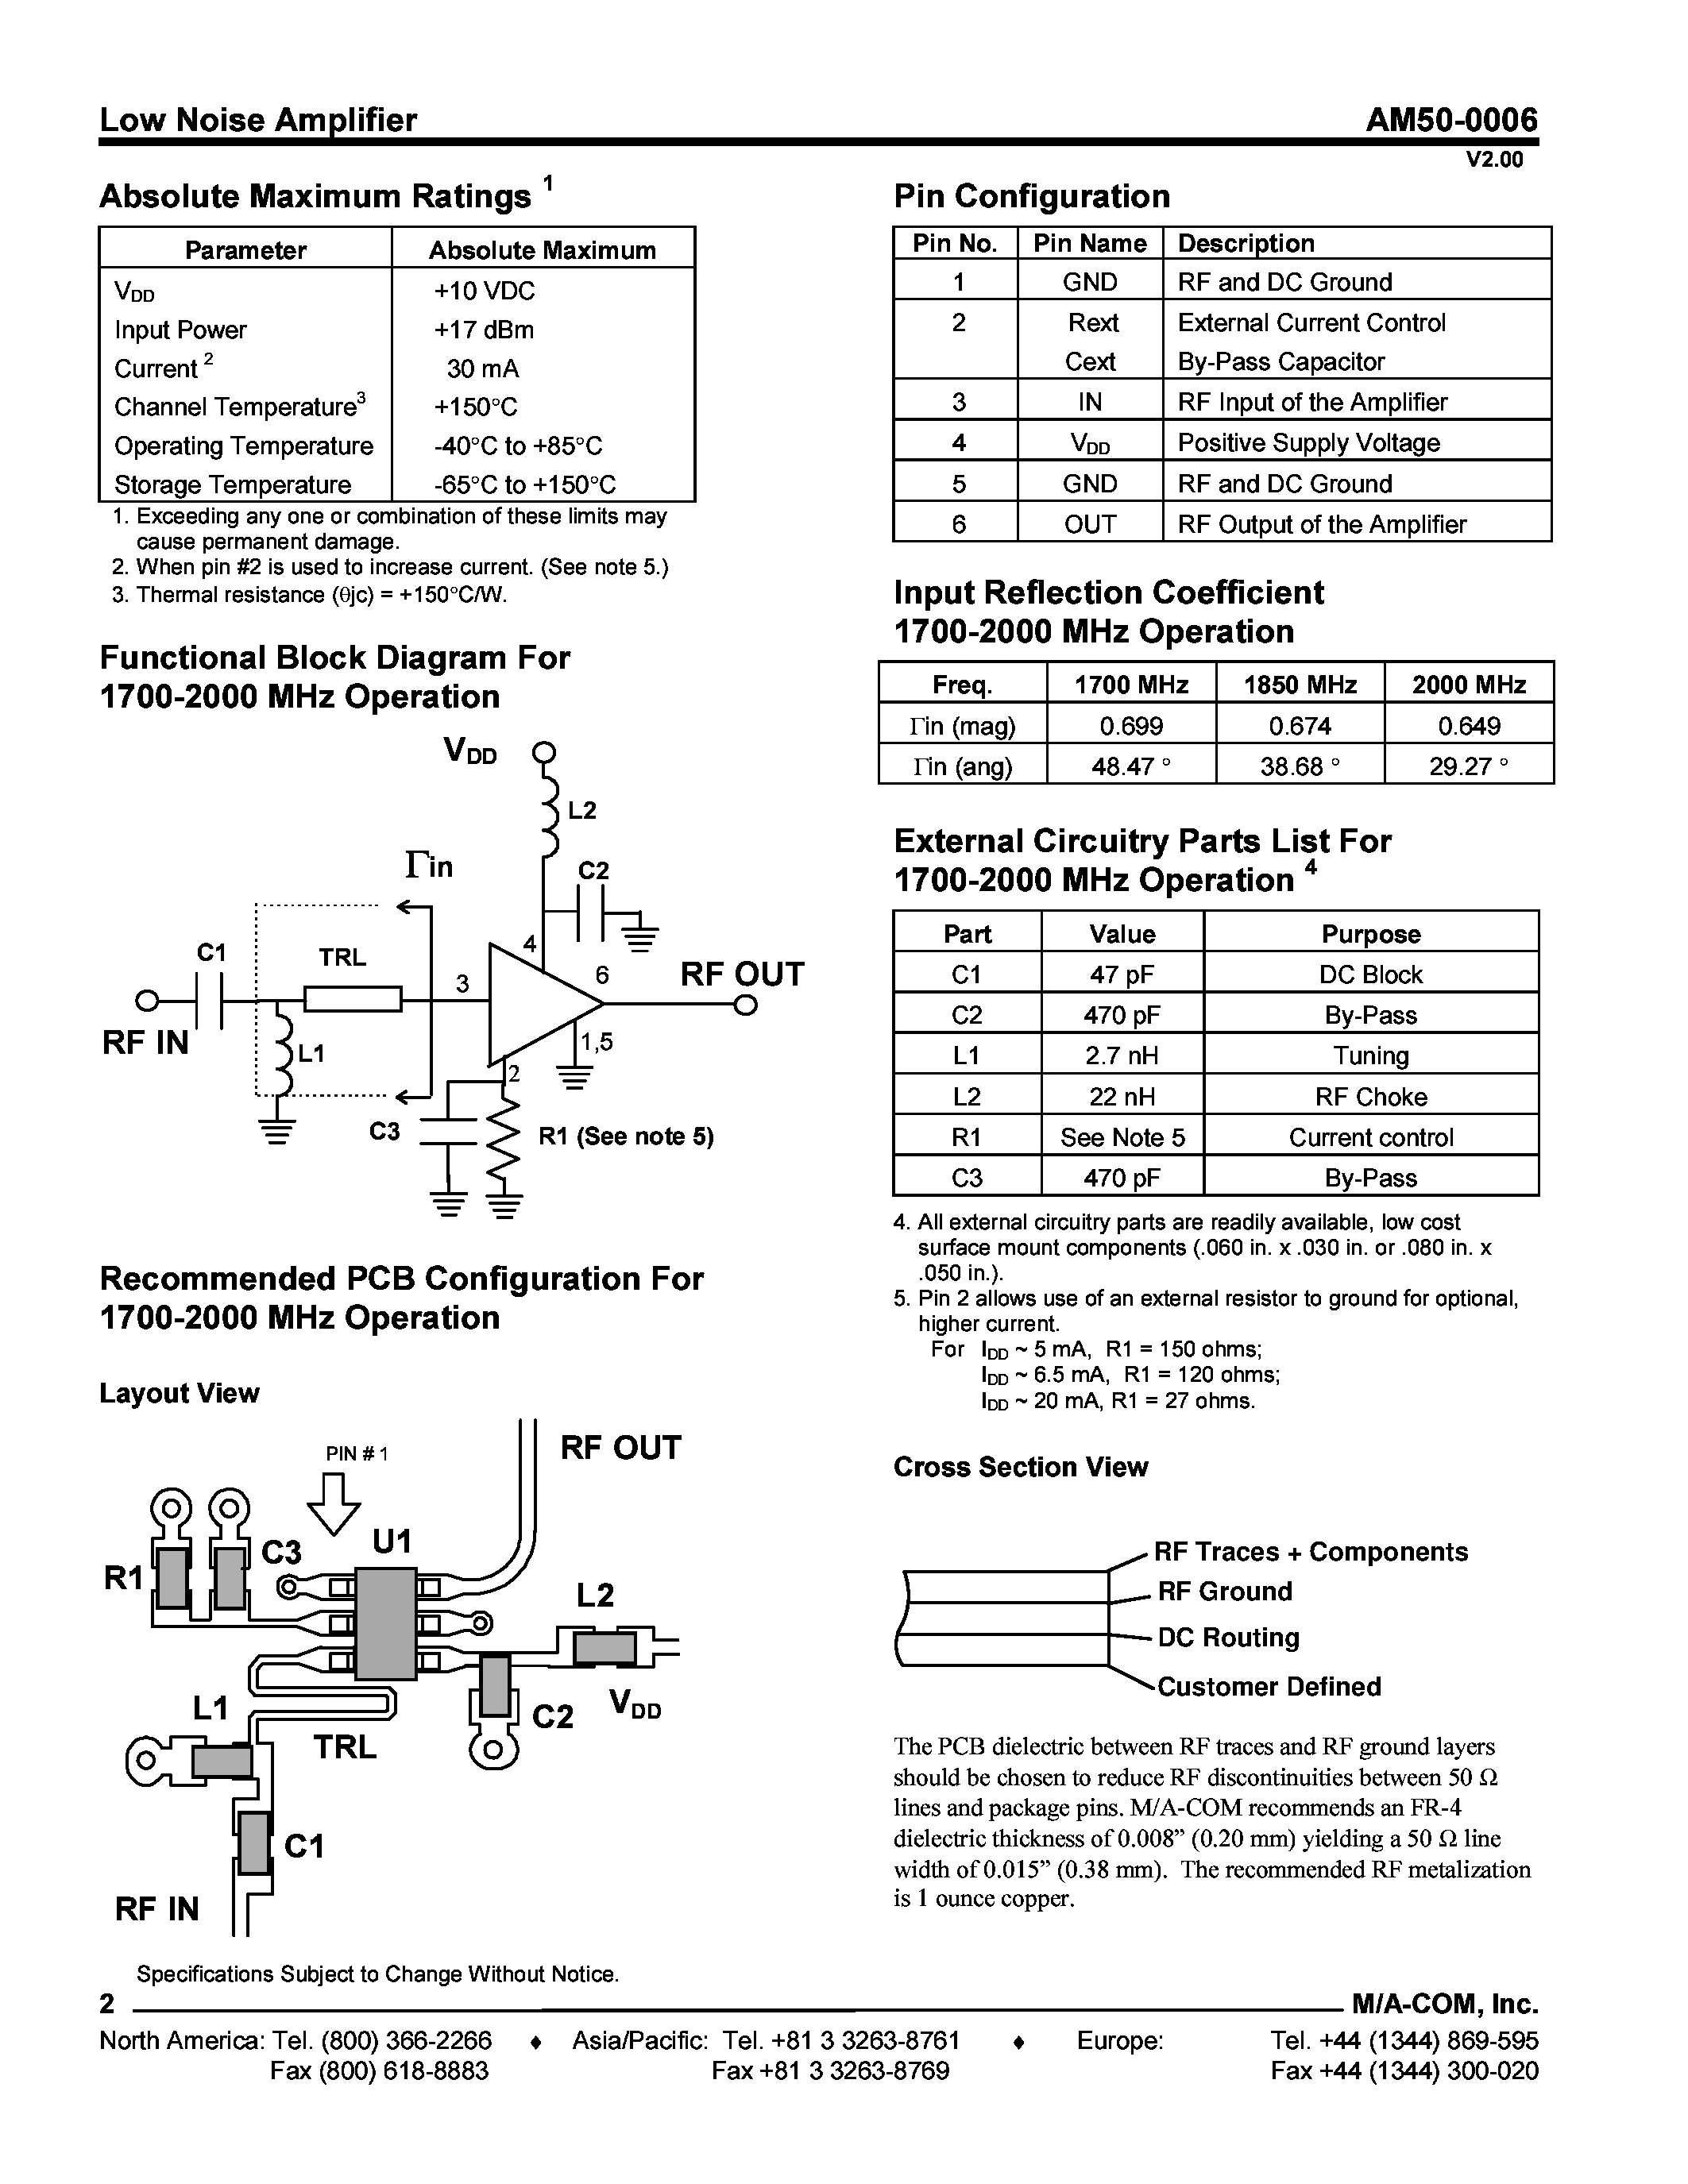 Datasheet AM50-0006PDC - Low Noise Amplifier 1400 - 2000 MHz page 2